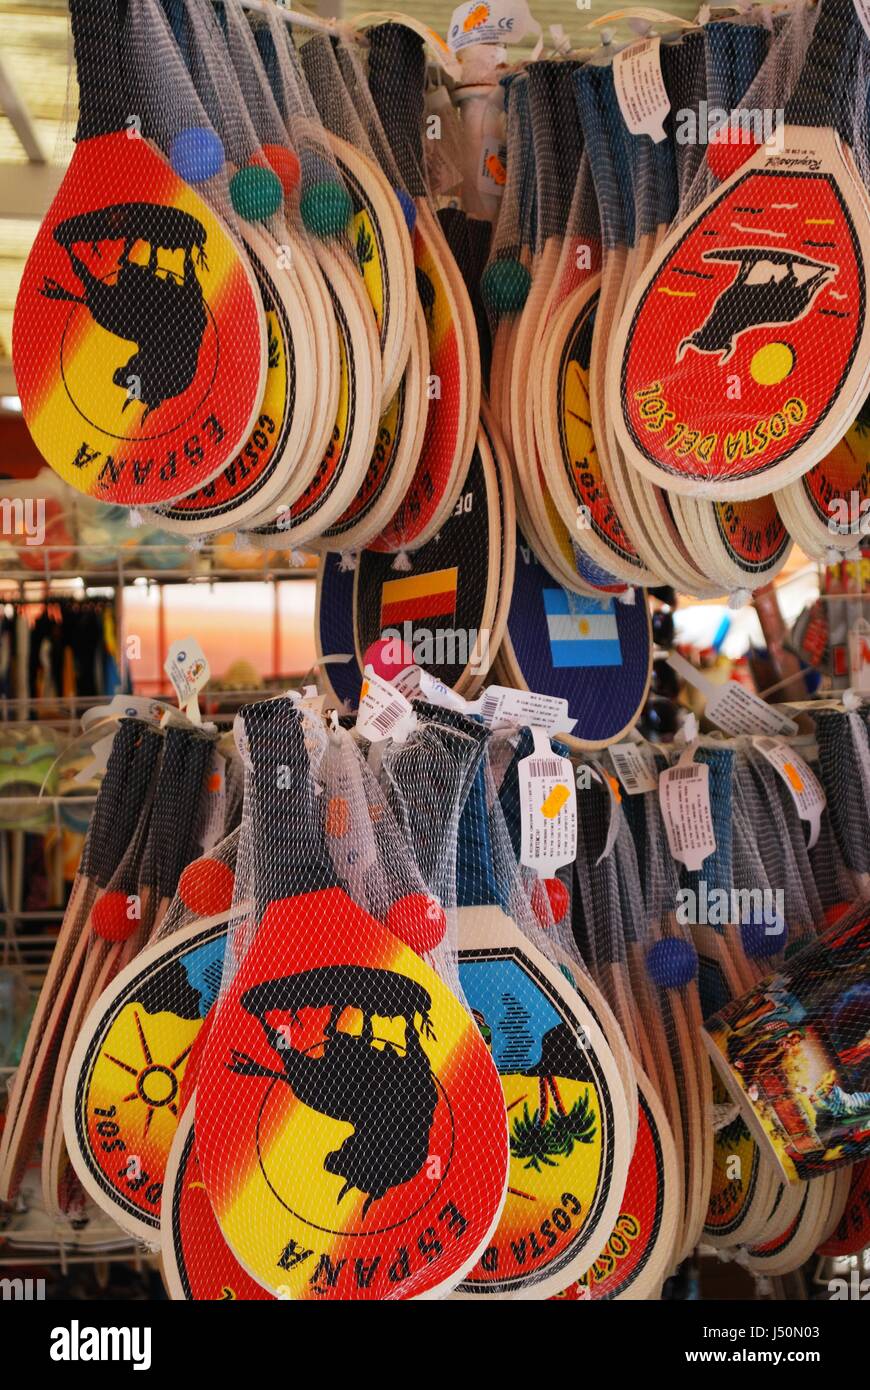 Bat and ball sets for sale at a tourist shop, Torremolinos, Malaga Province, Andalusia, Spain, Western Europe. Stock Photo